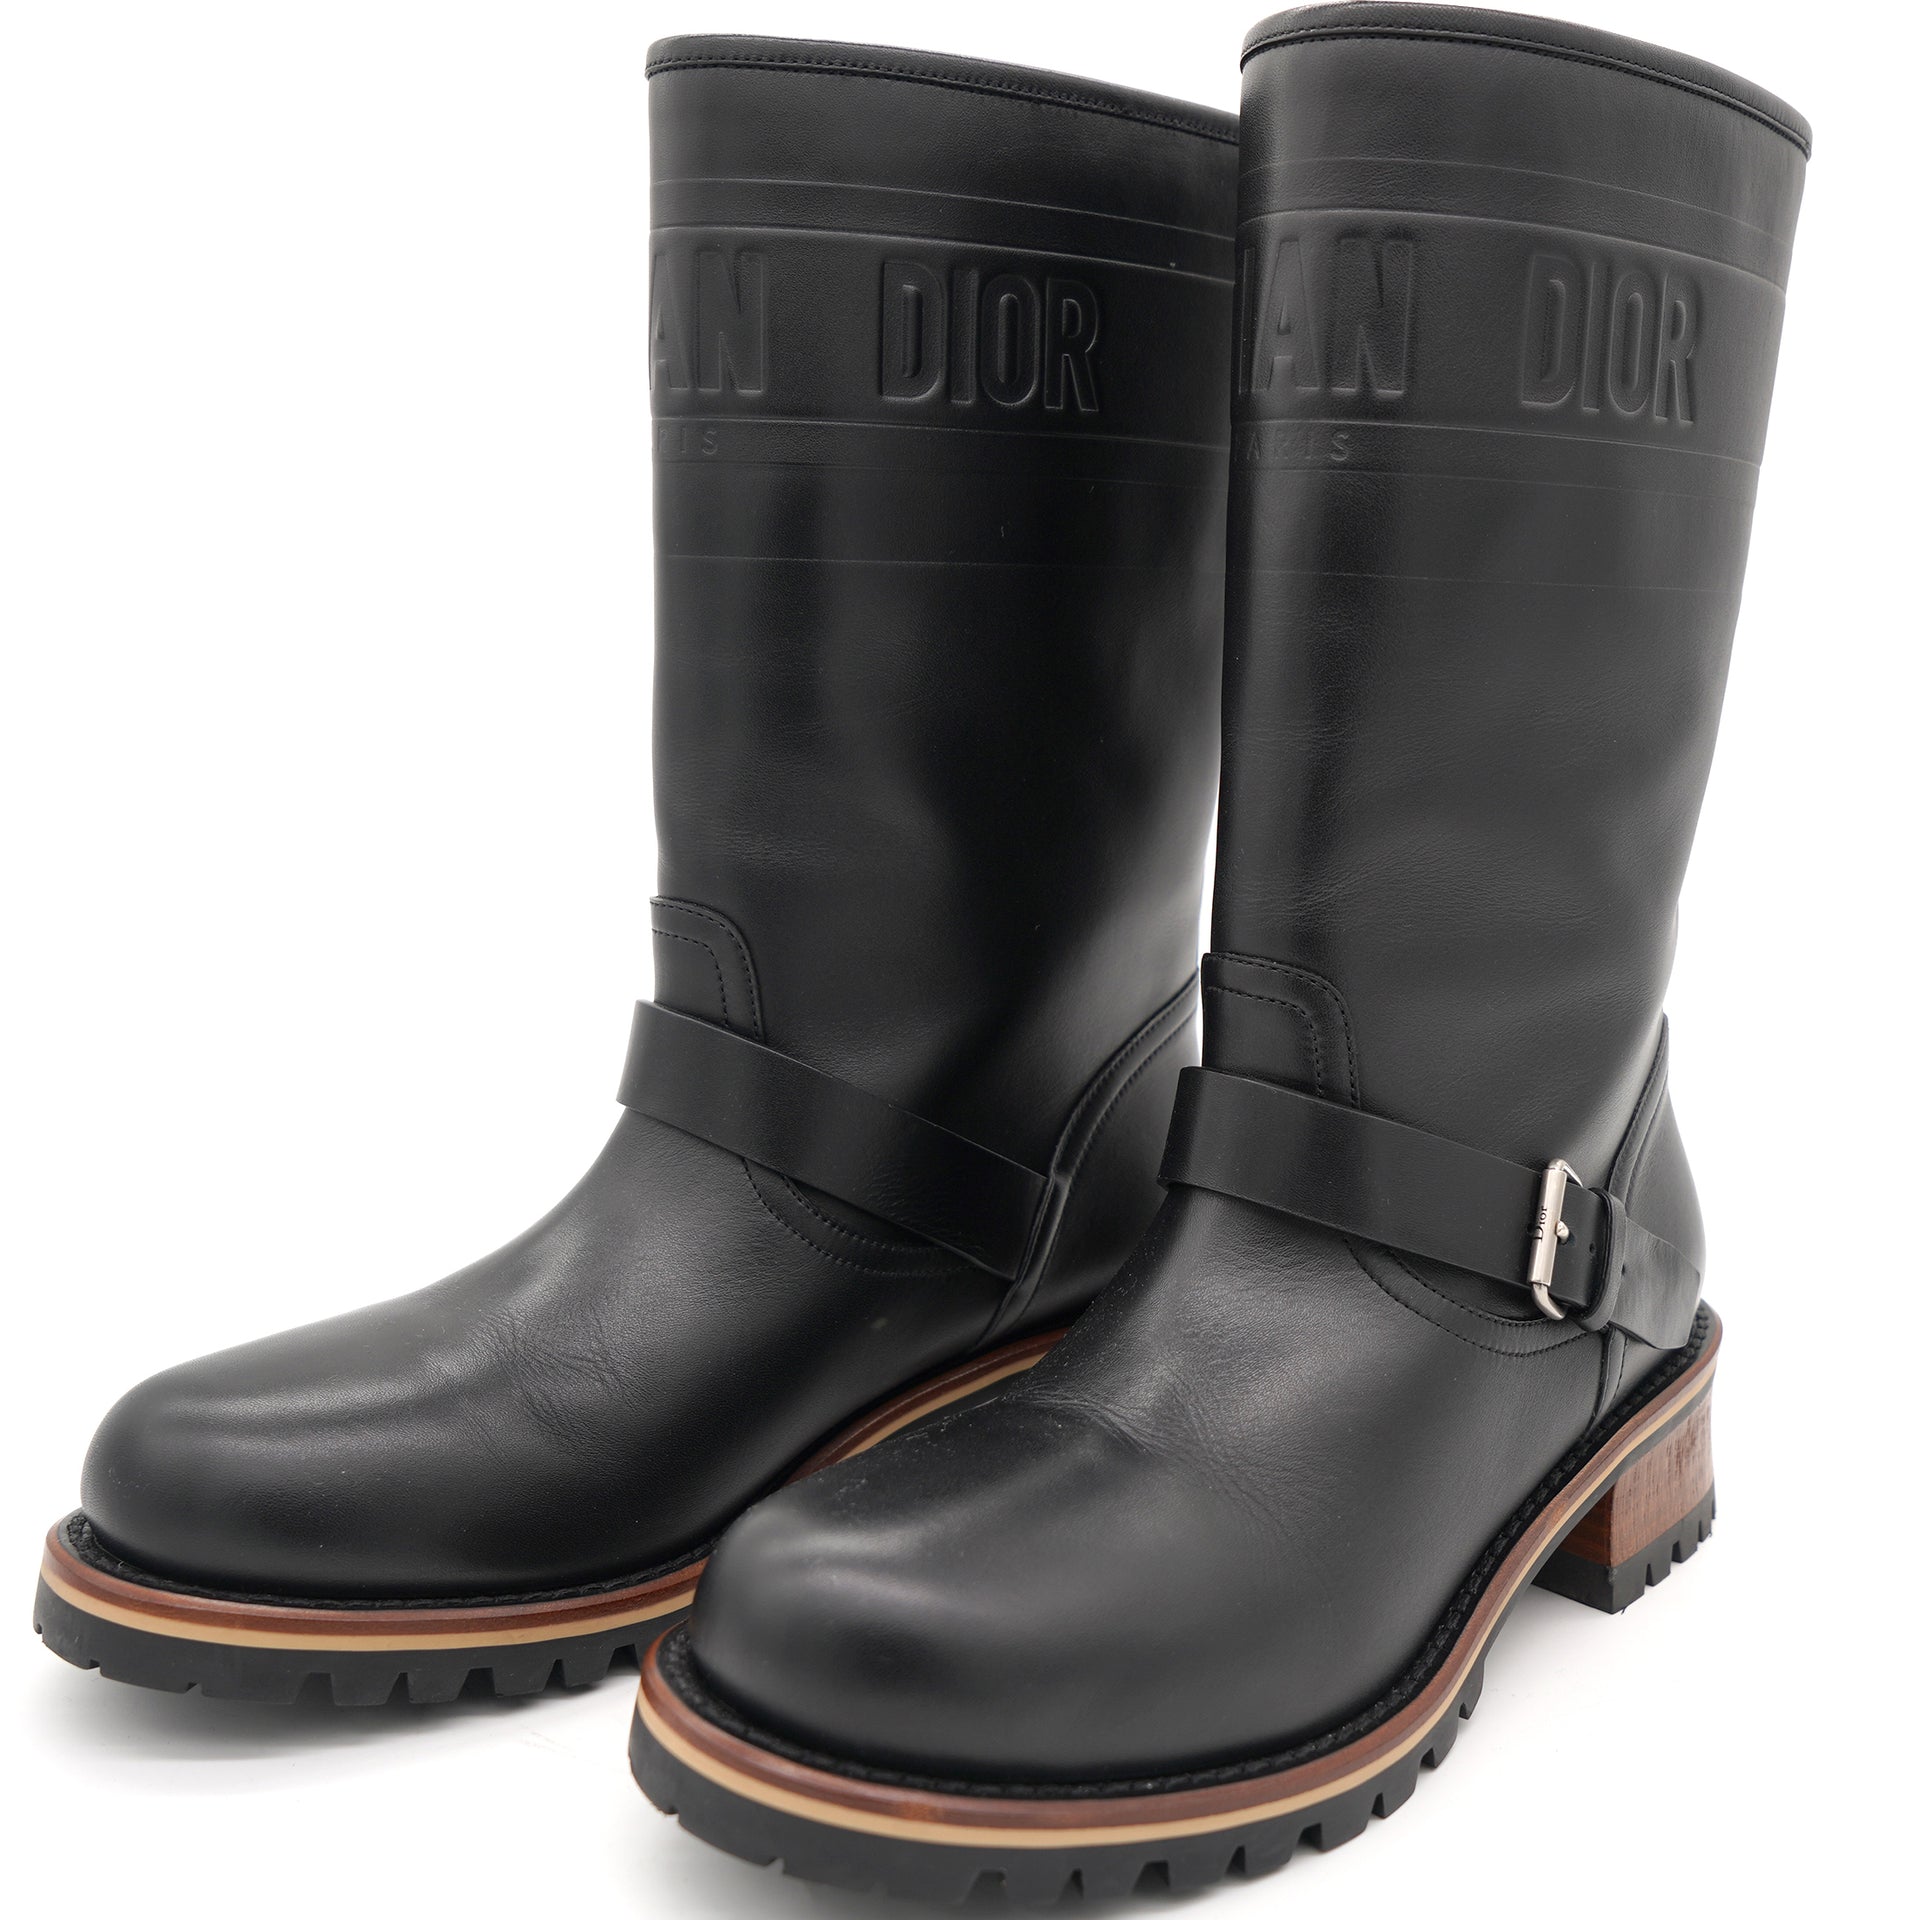 Black Leather CHRISTIAN DIOR logo Boots 38